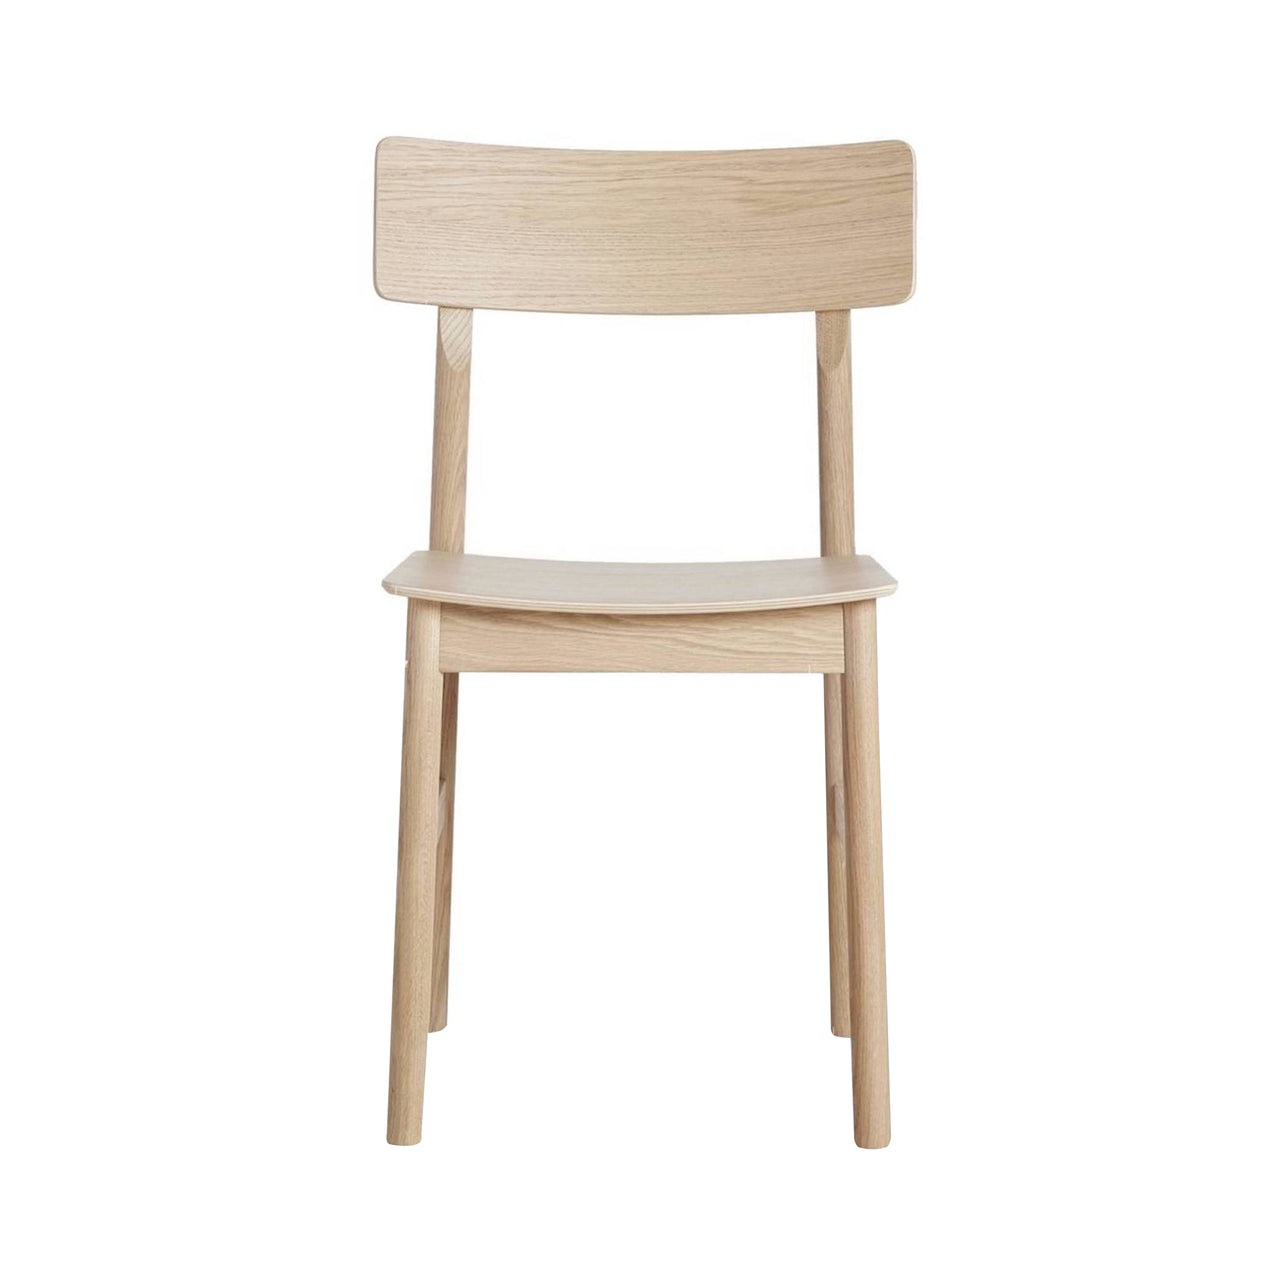 Pause Dining Chair 2.0: Set of 2 + White Pigmented Oak + Without Seatpad